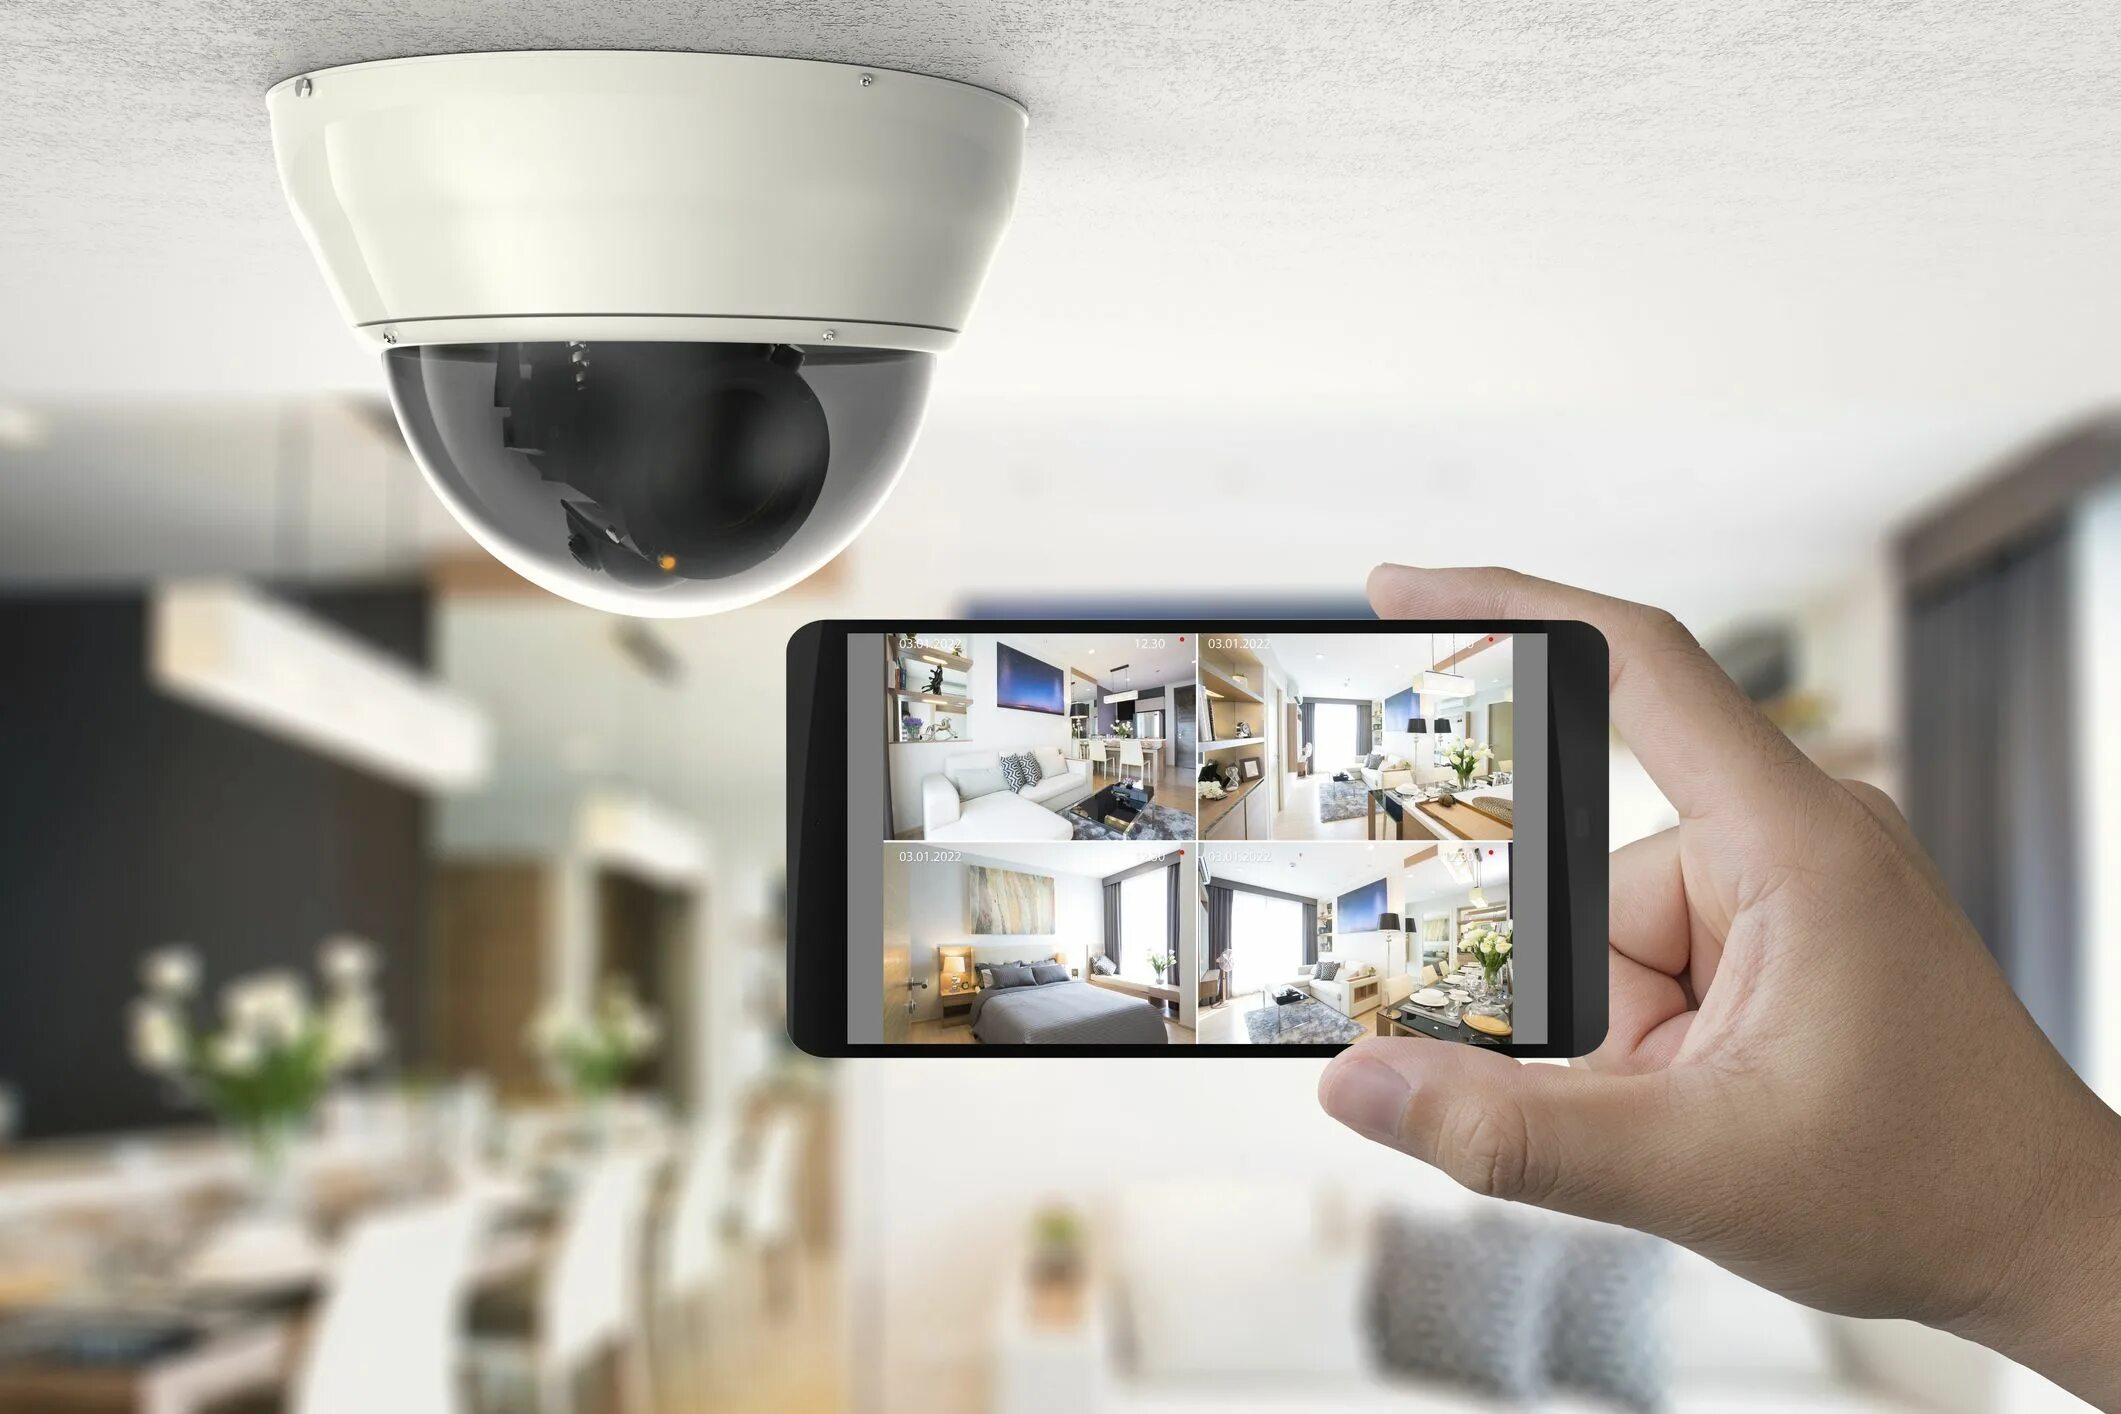 Keep the latest on home security systems. Видеонаблюдение. Видеонаблюдение умный дом. Видеонаблюдение в доме. Камера видеонаблюдения на доме.